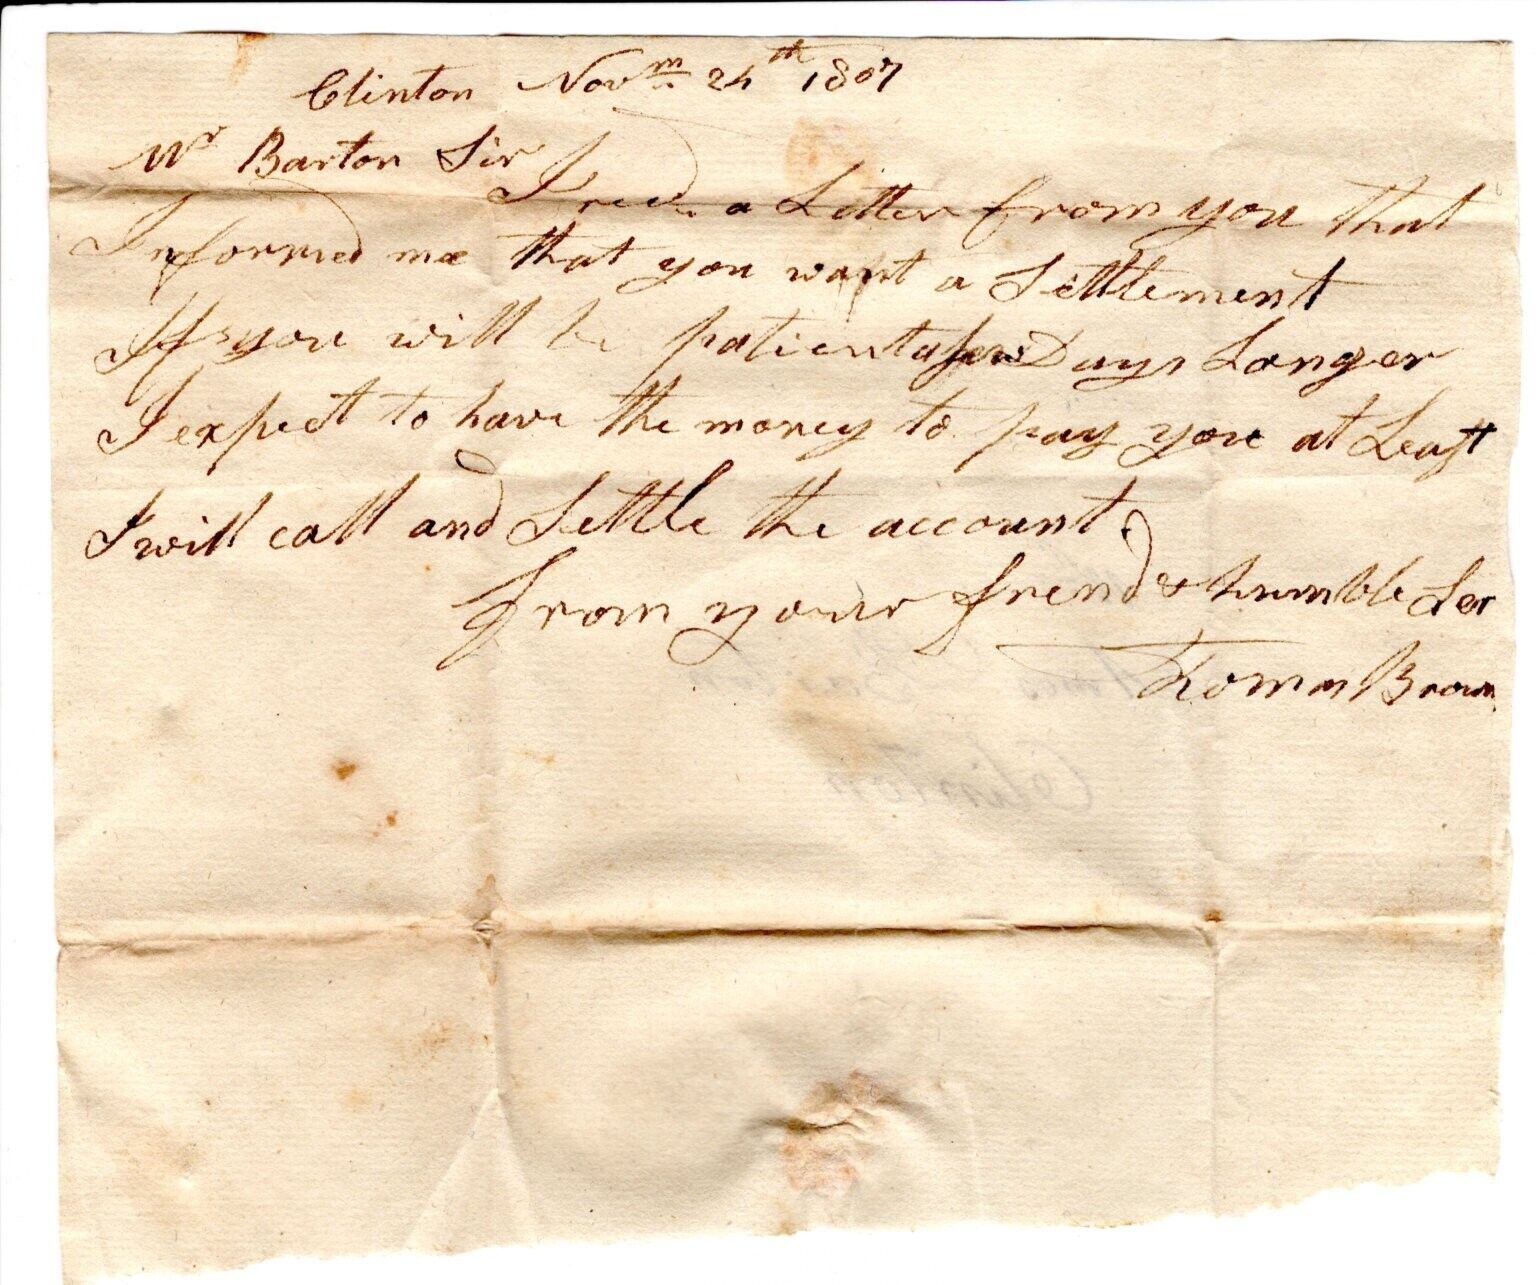 T20-79973 Nov 24 1807 Letter Settlement to Amos Barton of Clinton Mass (Maine)